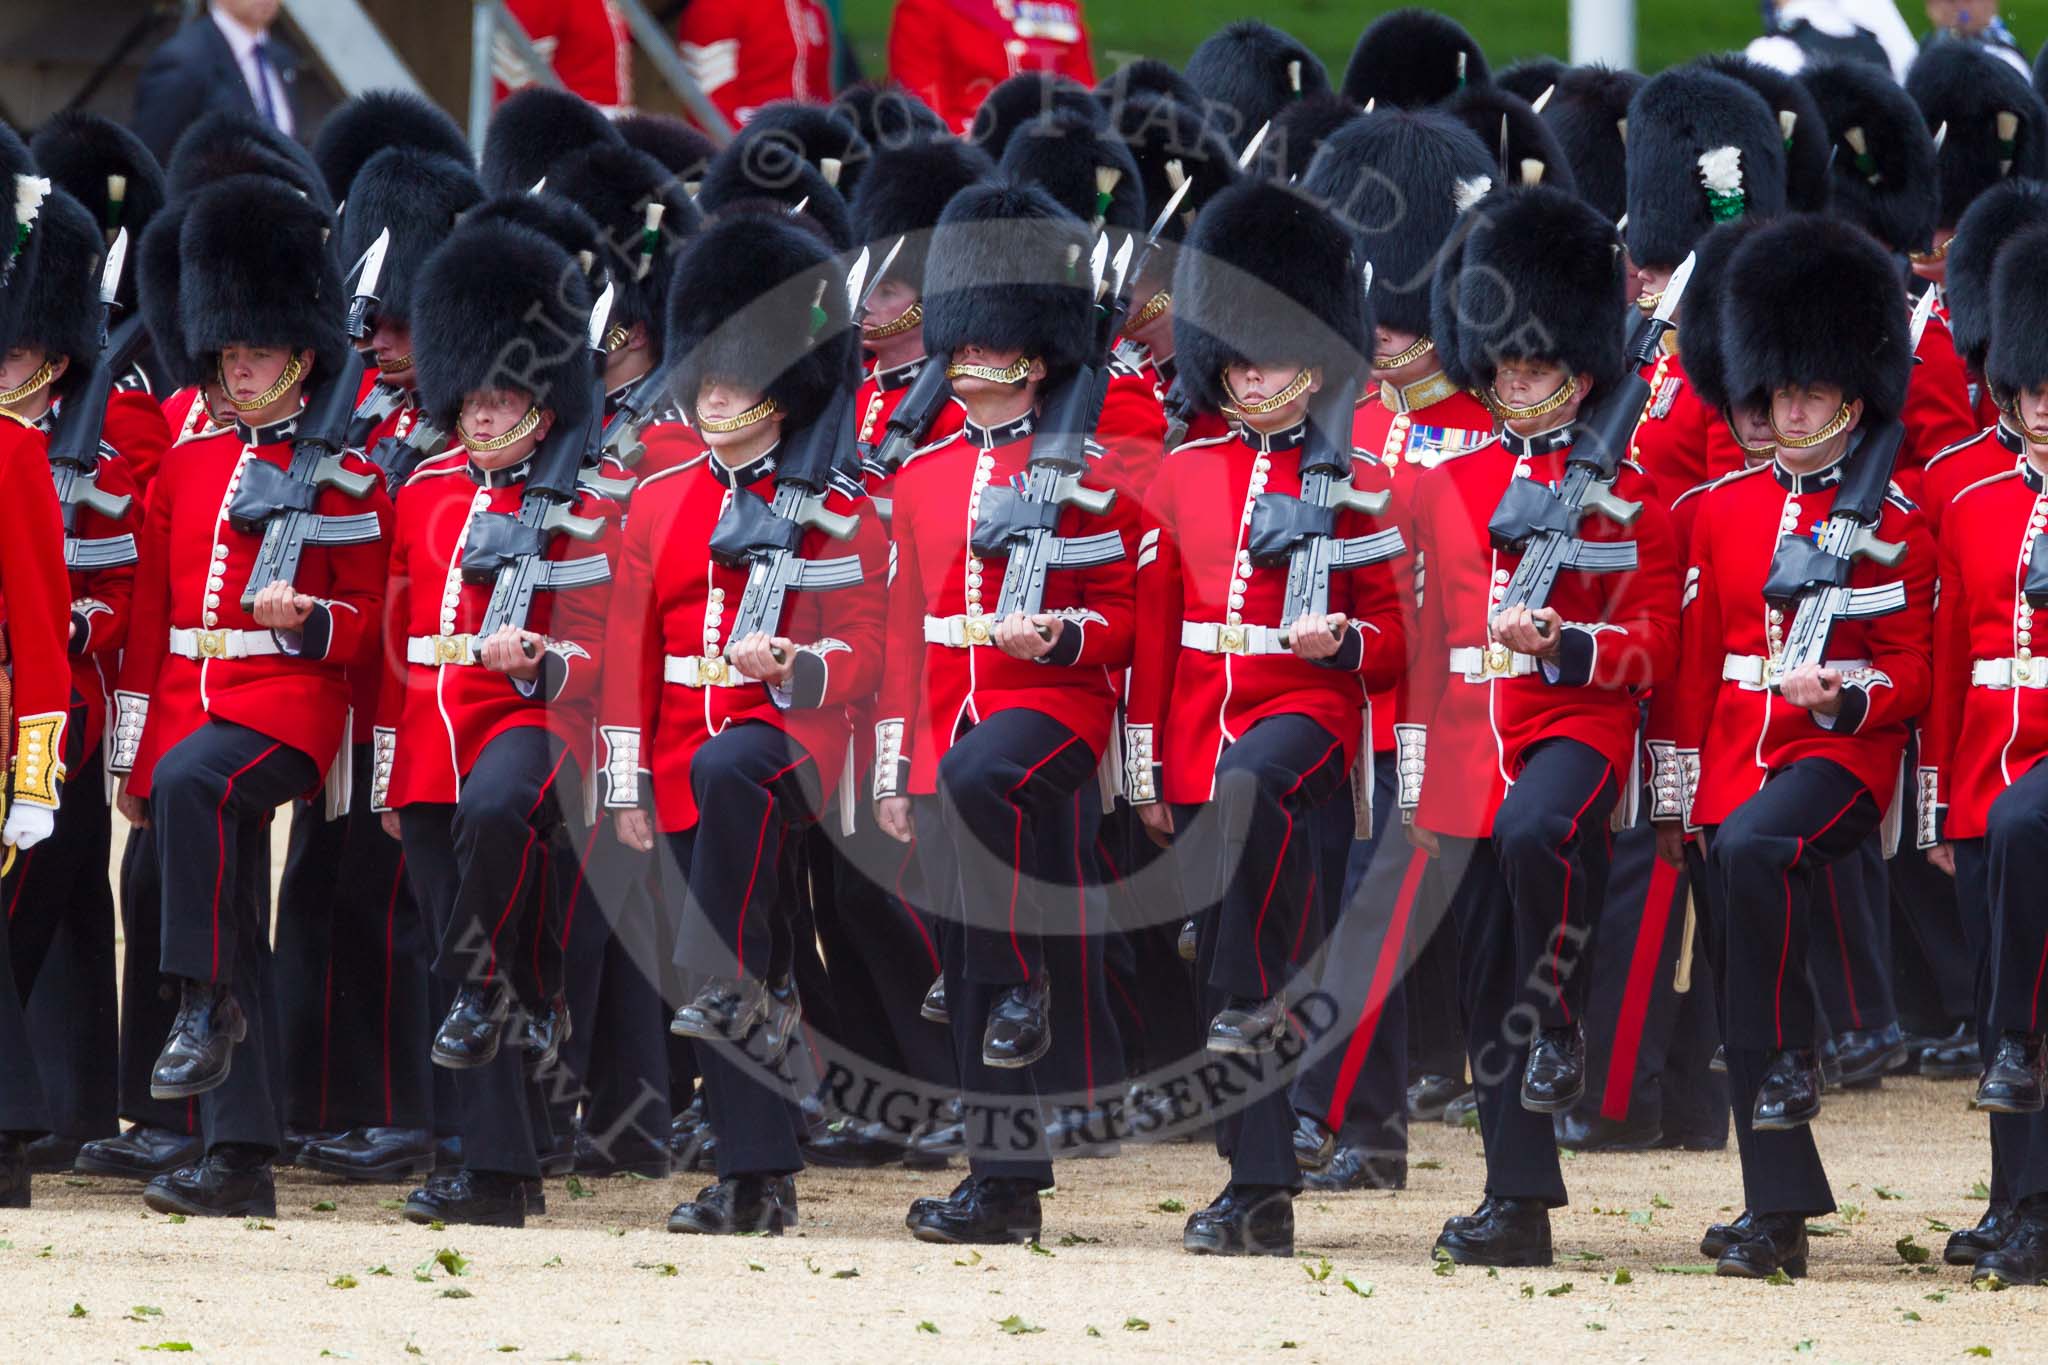 The Colonel's Review 2015.
Horse Guards Parade, Westminster,
London,

United Kingdom,
on 06 June 2015 at 11:31, image #353